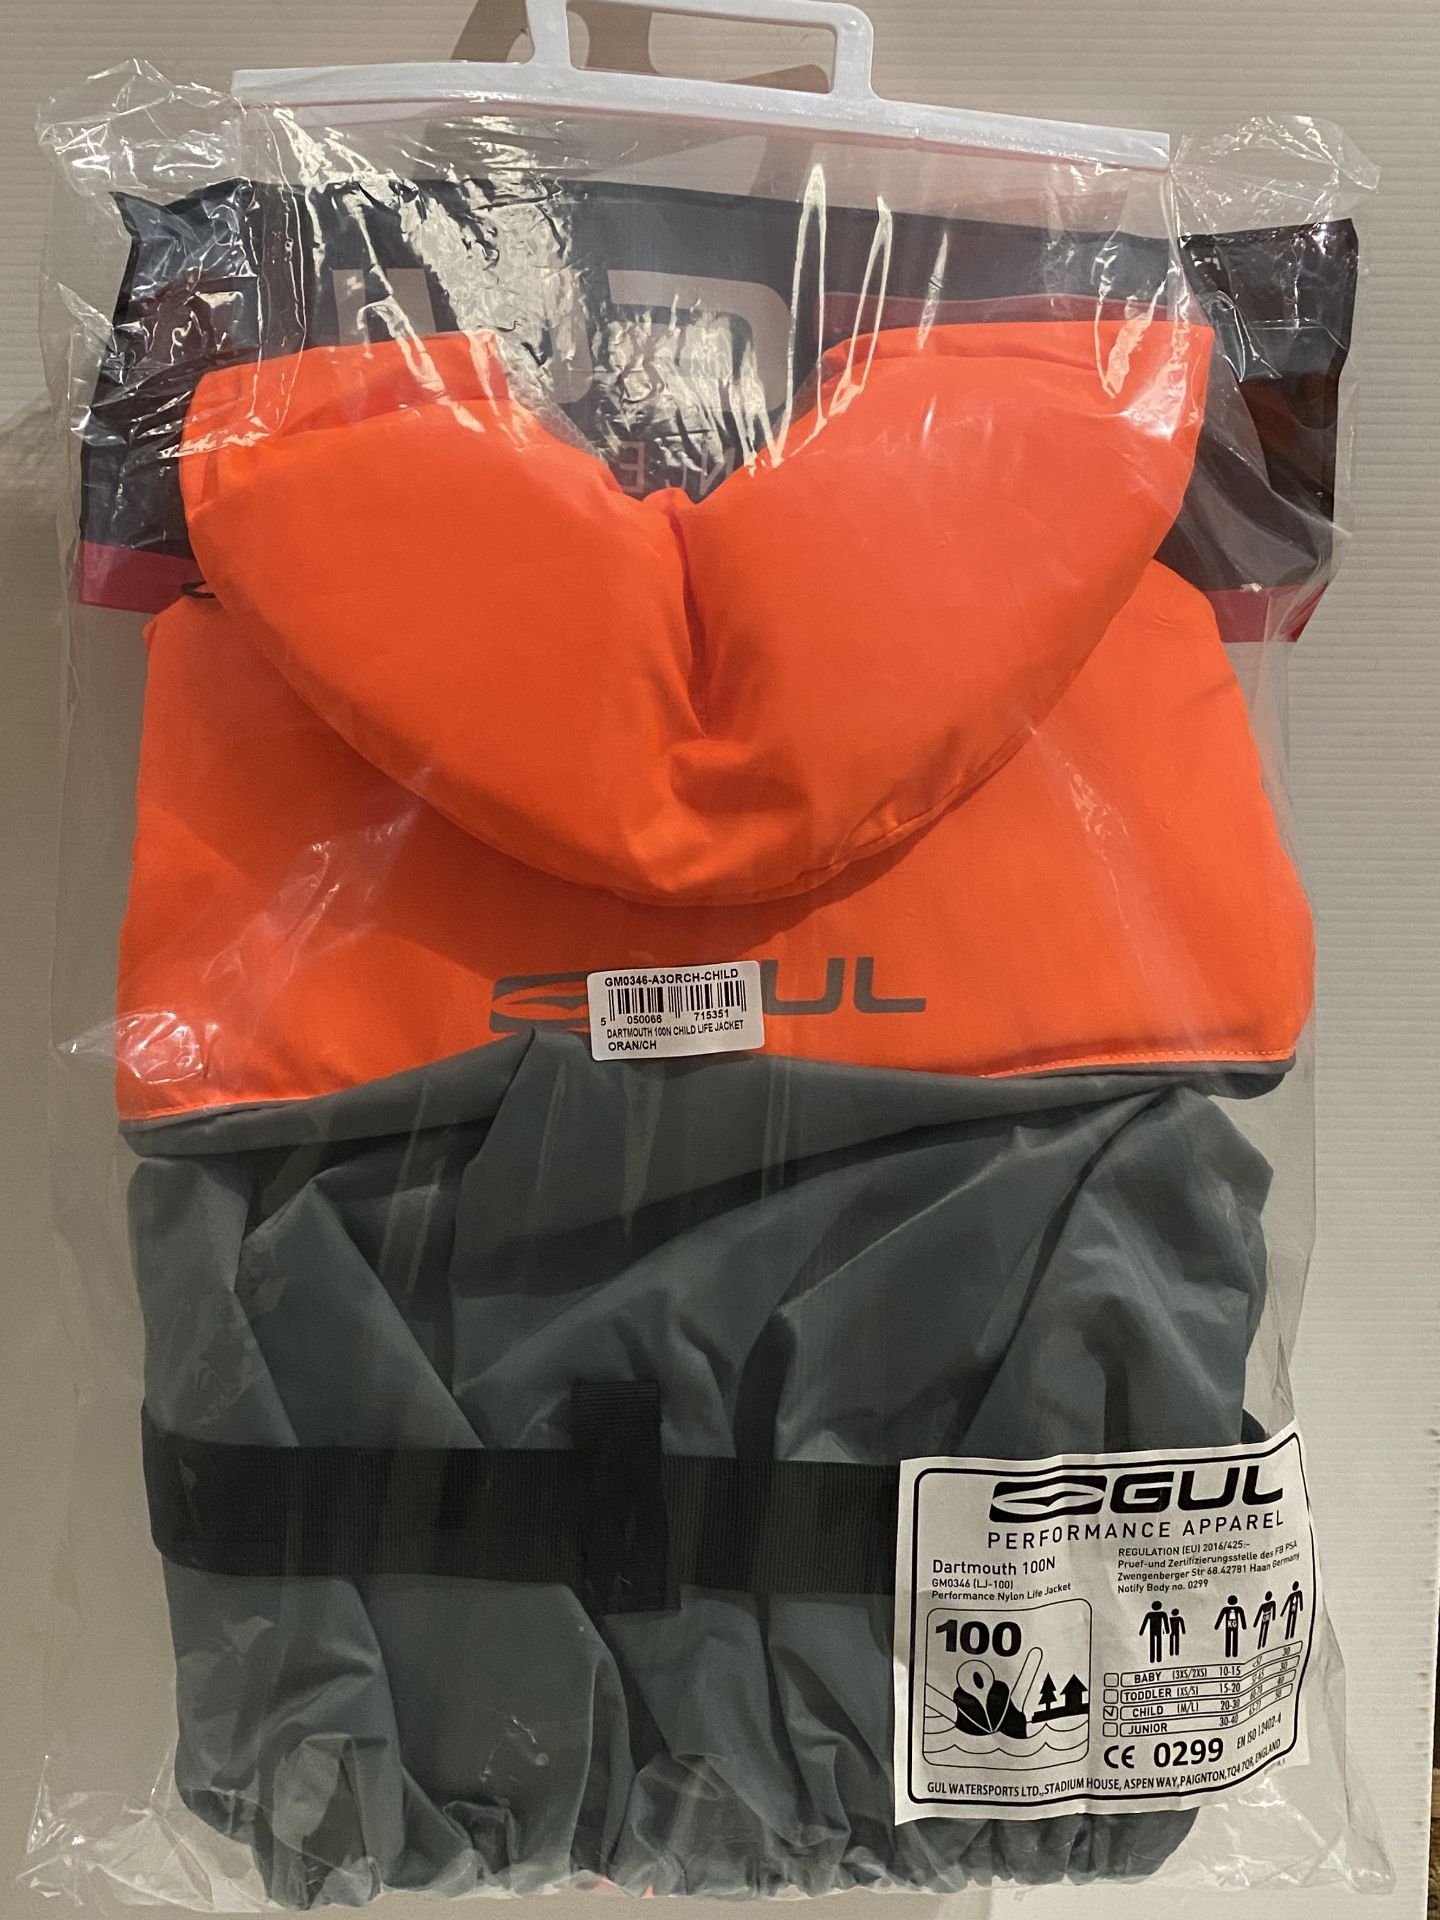 A GUL Performance Apparel Dartmouth 100N Performance Nylon Life Jacket - Size - Child - RRP £45. - Image 2 of 4